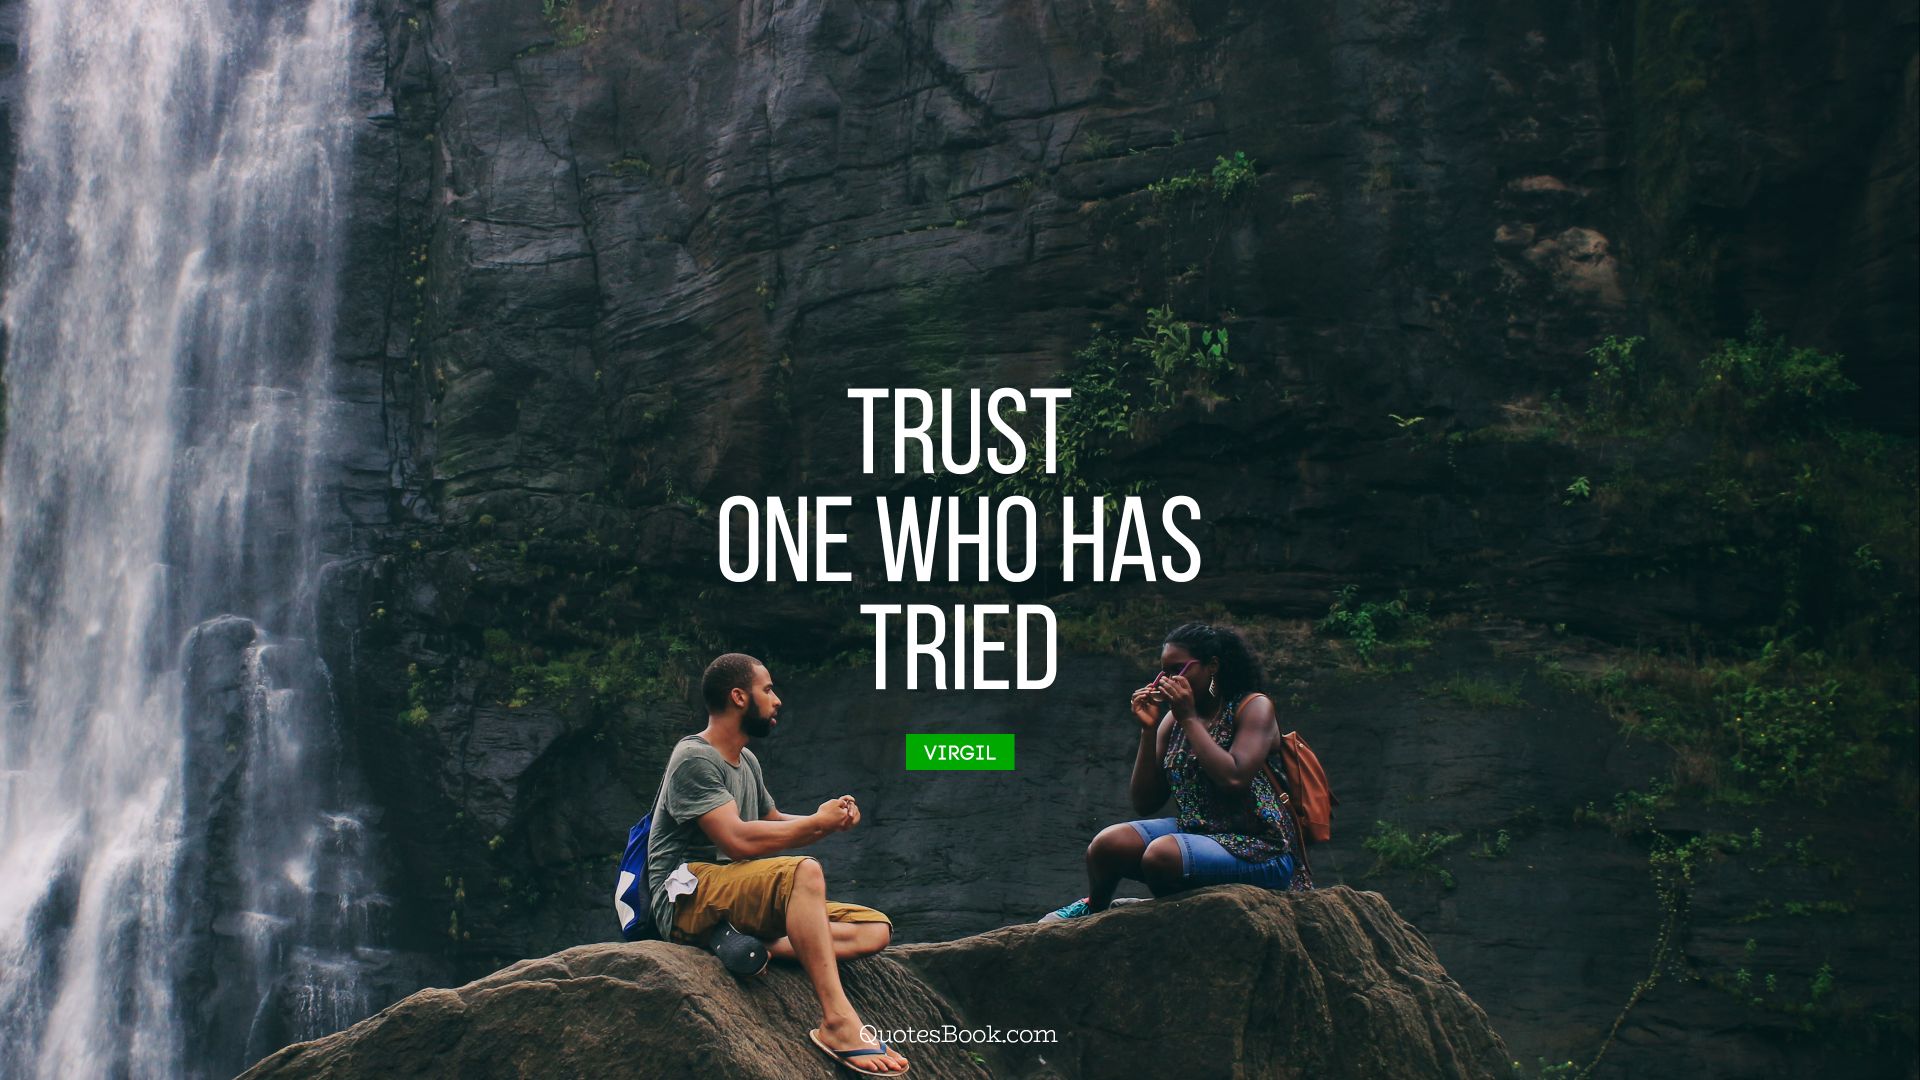 Trust one who has tried. - Quote by Virgil